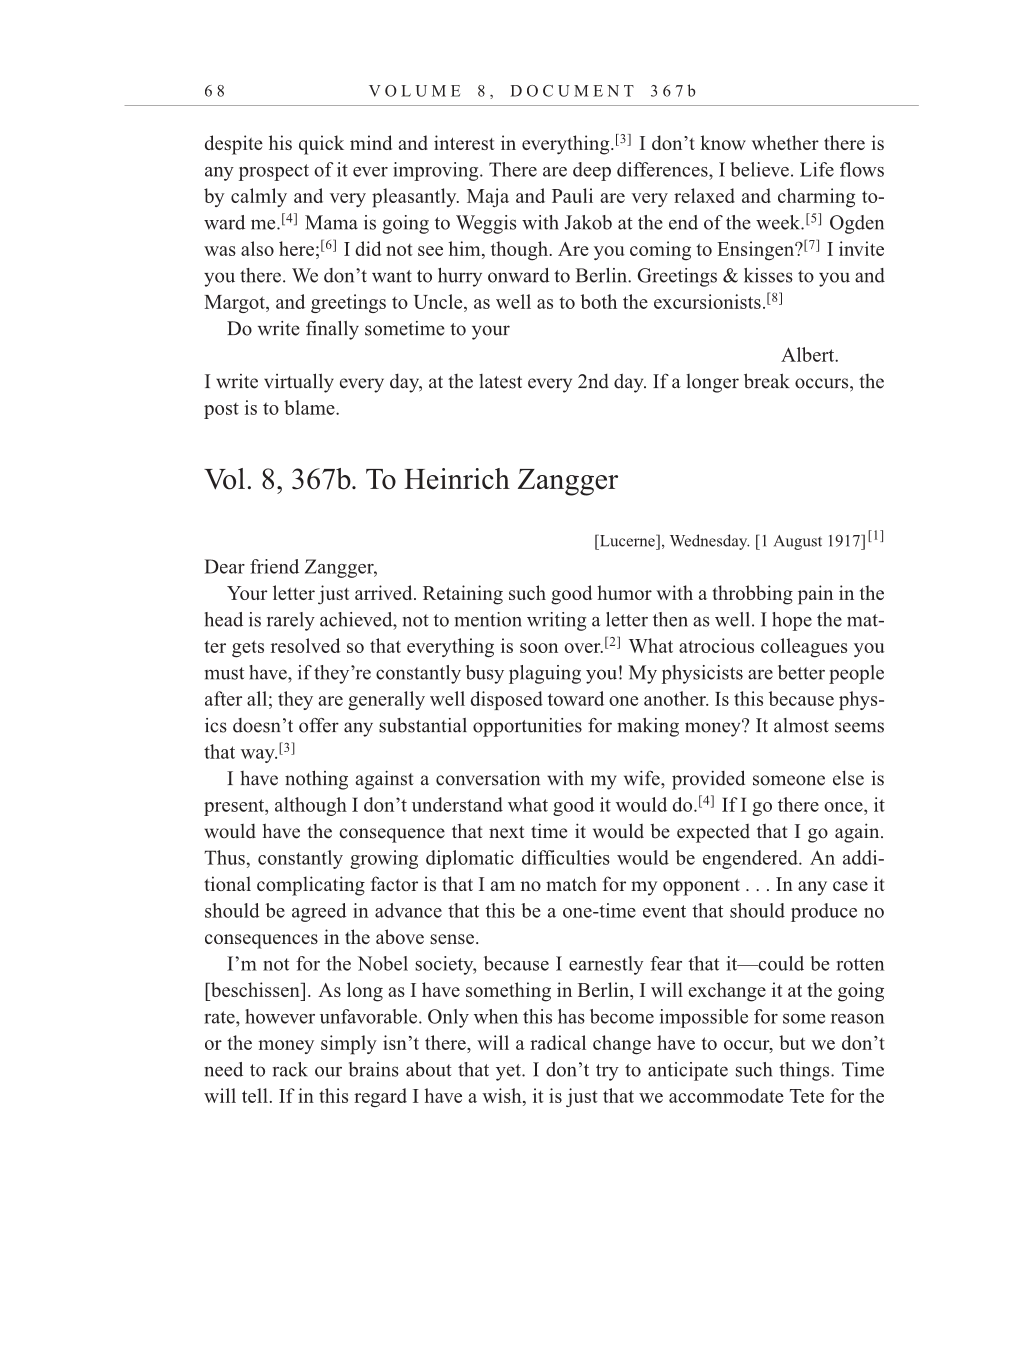 Volume 10: The Berlin Years: Correspondence, May-December 1920, and Supplementary Correspondence, 1909-1920 (English translation supplement) page 68